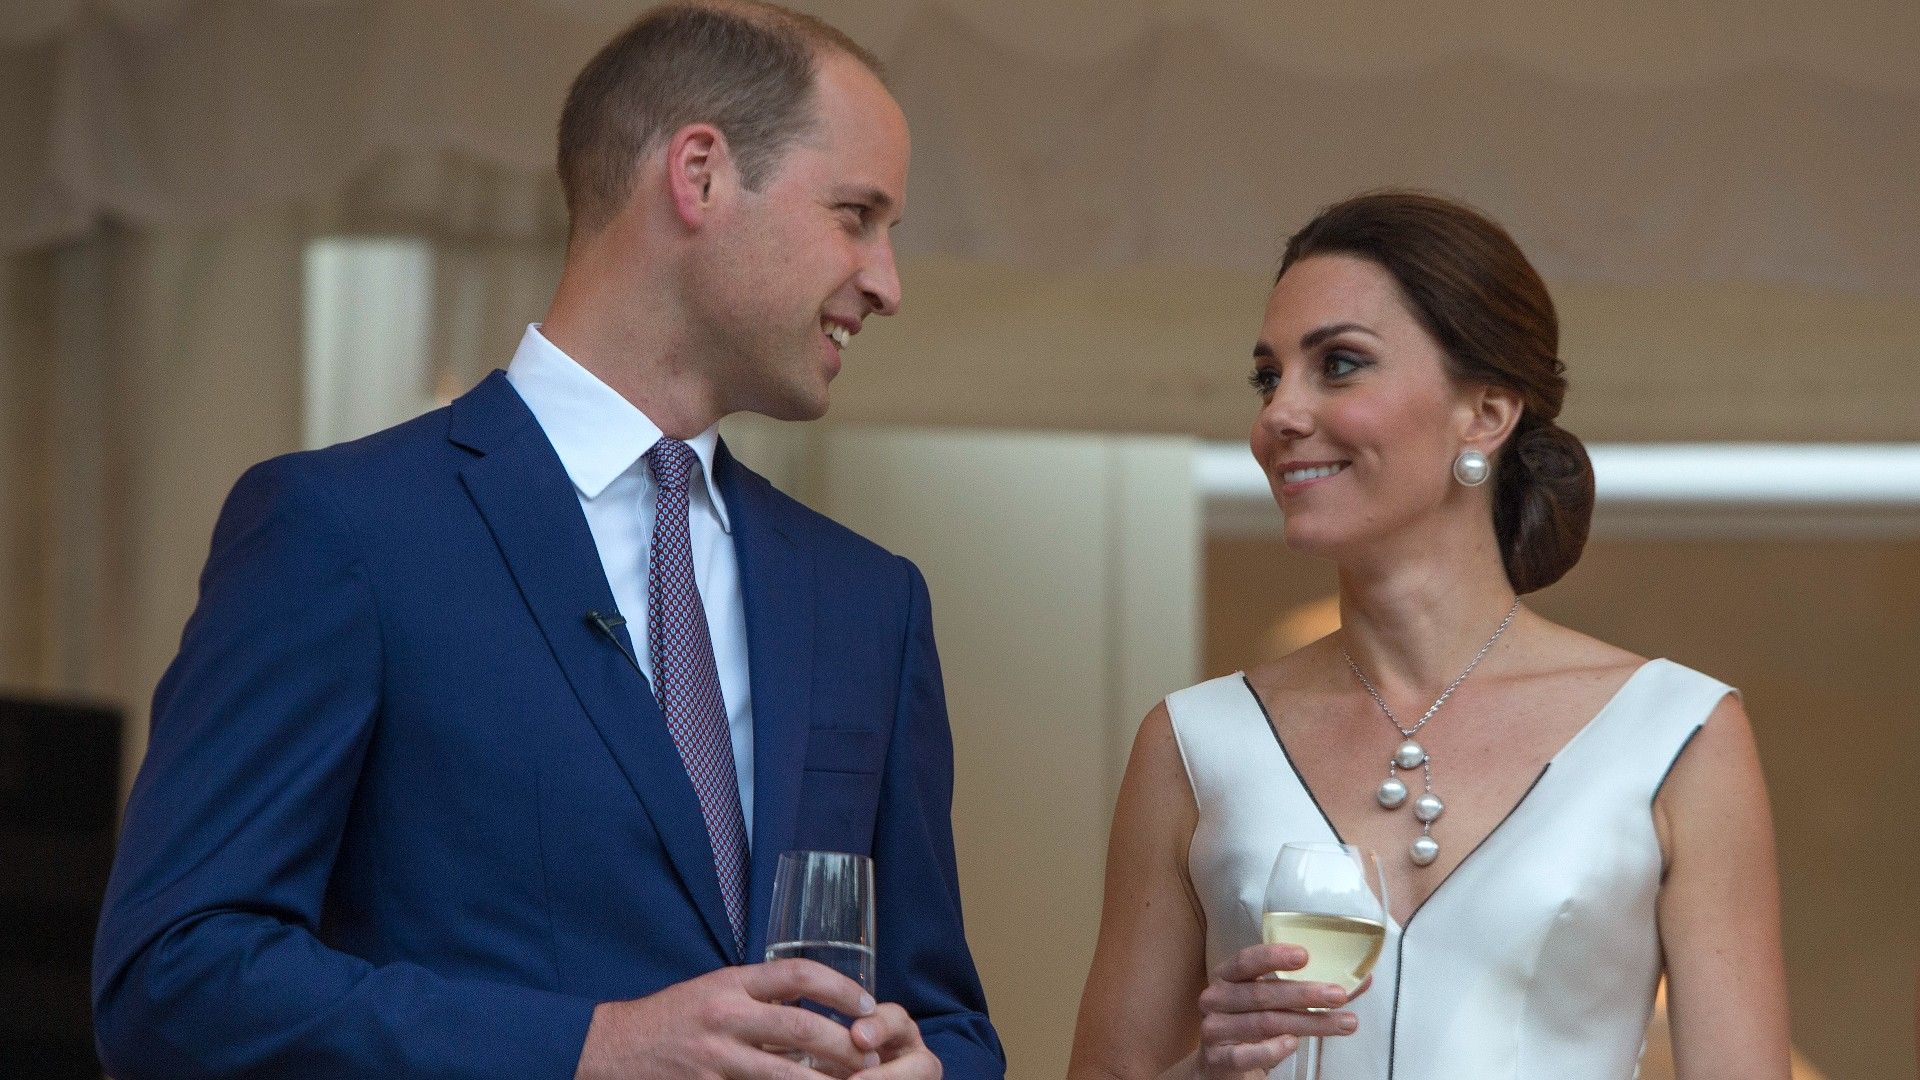 <p>                     In 2017, while on a tour of Poland and Germany, William and Kate attended a party in honour of the late Queen Elizabeth's birthday.                   </p>                                      <p>                     It was attended by over 600 guests and William delivered a speech to the packed party where he reportedly opened the speech with a greeting in Polish.                   </p>                                      <p>                     If that wasn't a memorable moment in itself, Kate pulled off an elegant, timeless look.                   </p>                                      <p>                     Wearing a bespoke white cocktail dress by Polish designer Gosia Baczyńska, Kate complemented the delicate dress with a most enchanting set of pearl jewellery, including oversized earrings from Balenciaga and a cascading necklace with four large pearls.                   </p>